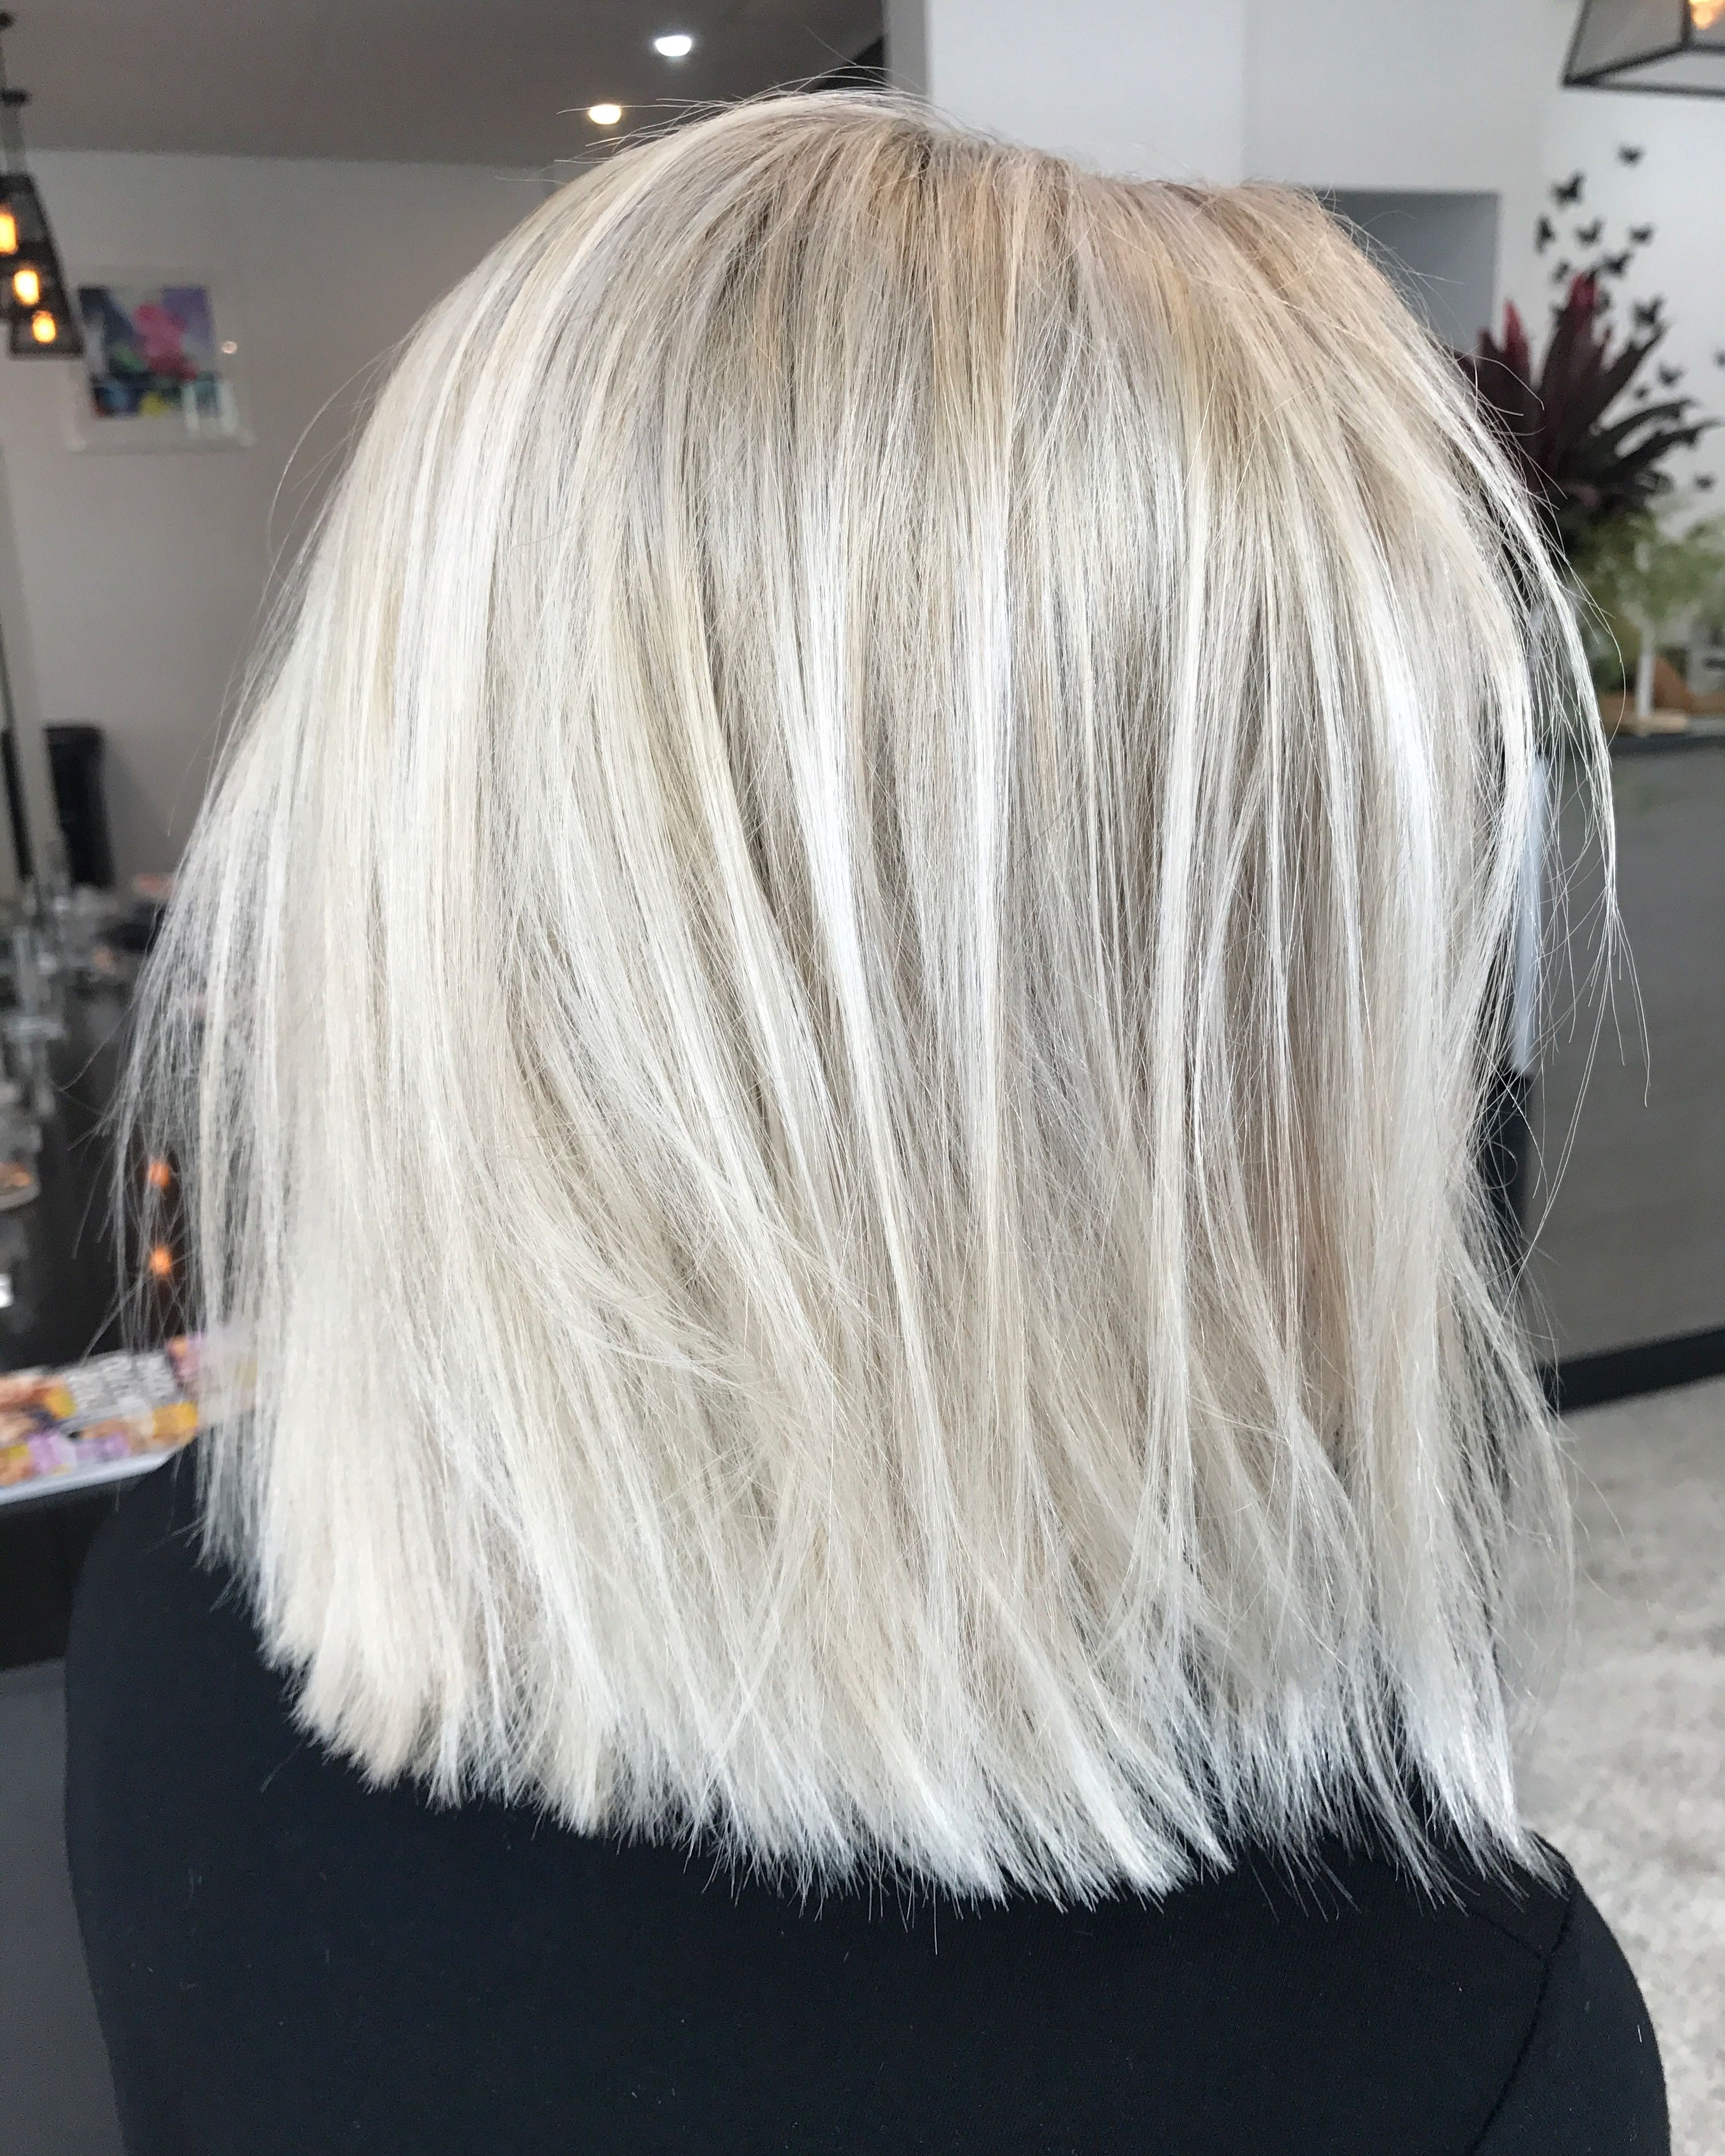 Blonde Lob Textured Short Hair Colour Lived In Hair Colour Cool Ash Regarding Fashionable Platinum Braided Updo Blonde Hairstyles (View 8 of 20)